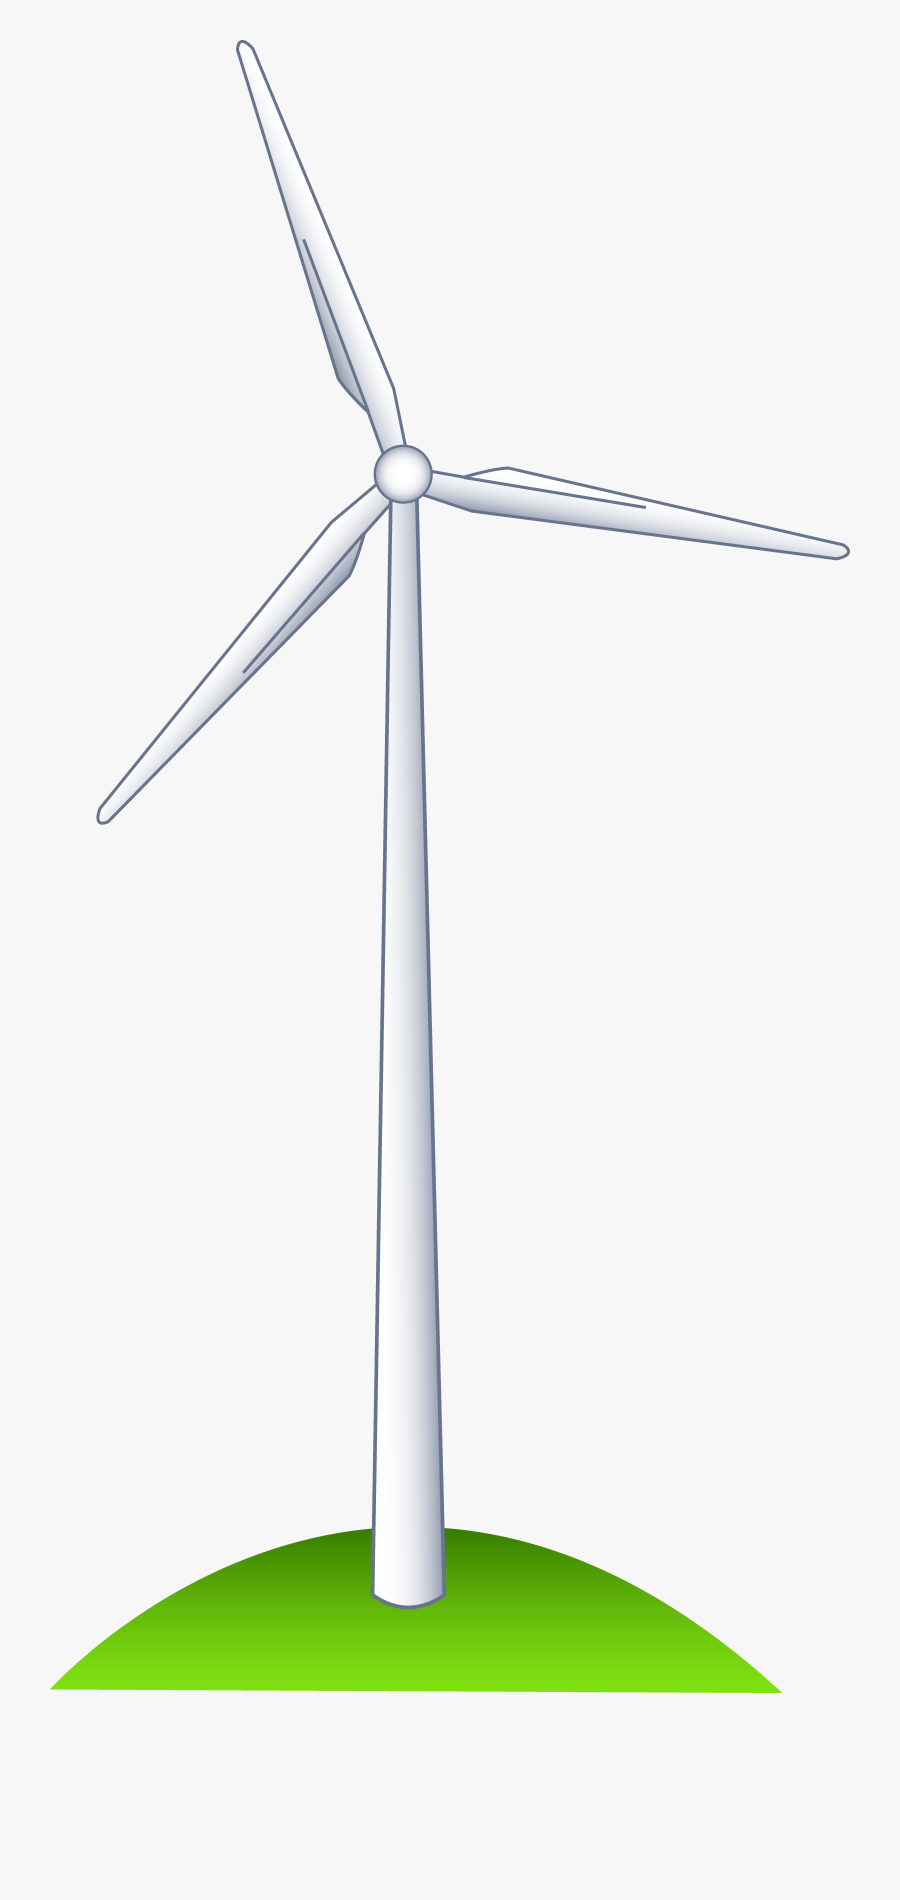 Thumb Image - Clipart Windmill Png, Transparent Clipart